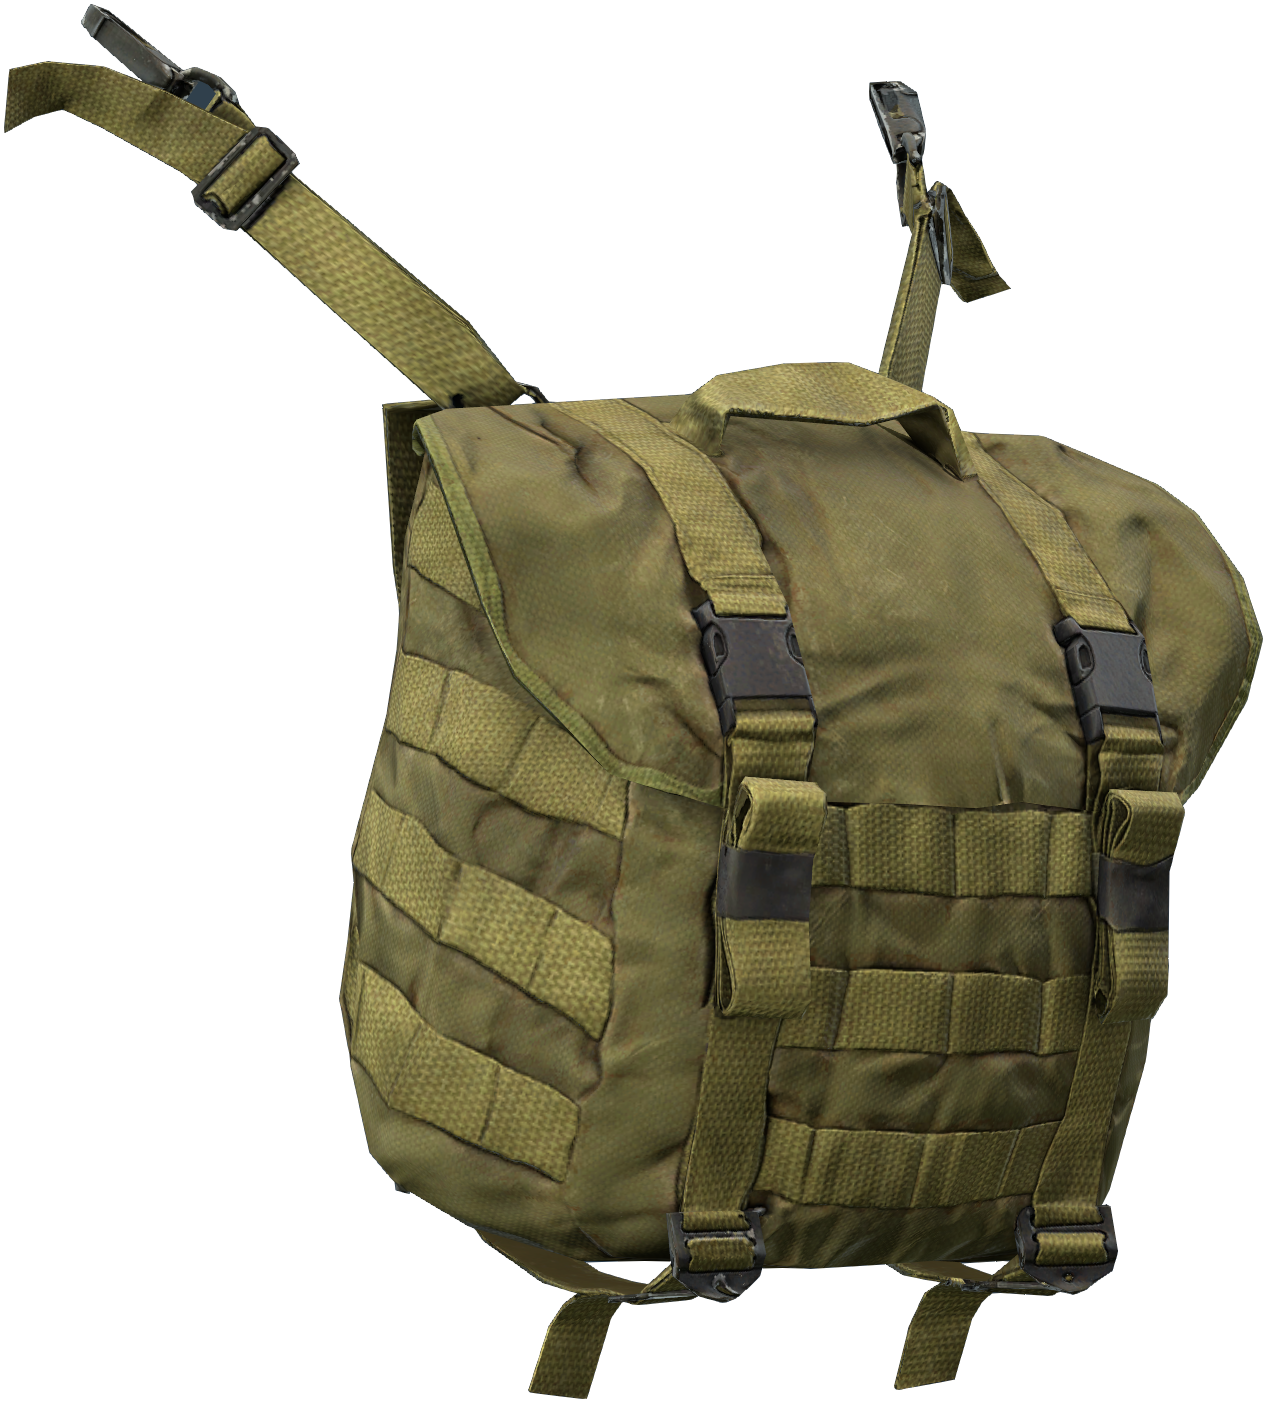 https://static.wikia.nocookie.net/dayz_gamepedia/images/d/d3/SmershBag.png/revision/latest?cb=20230809141156